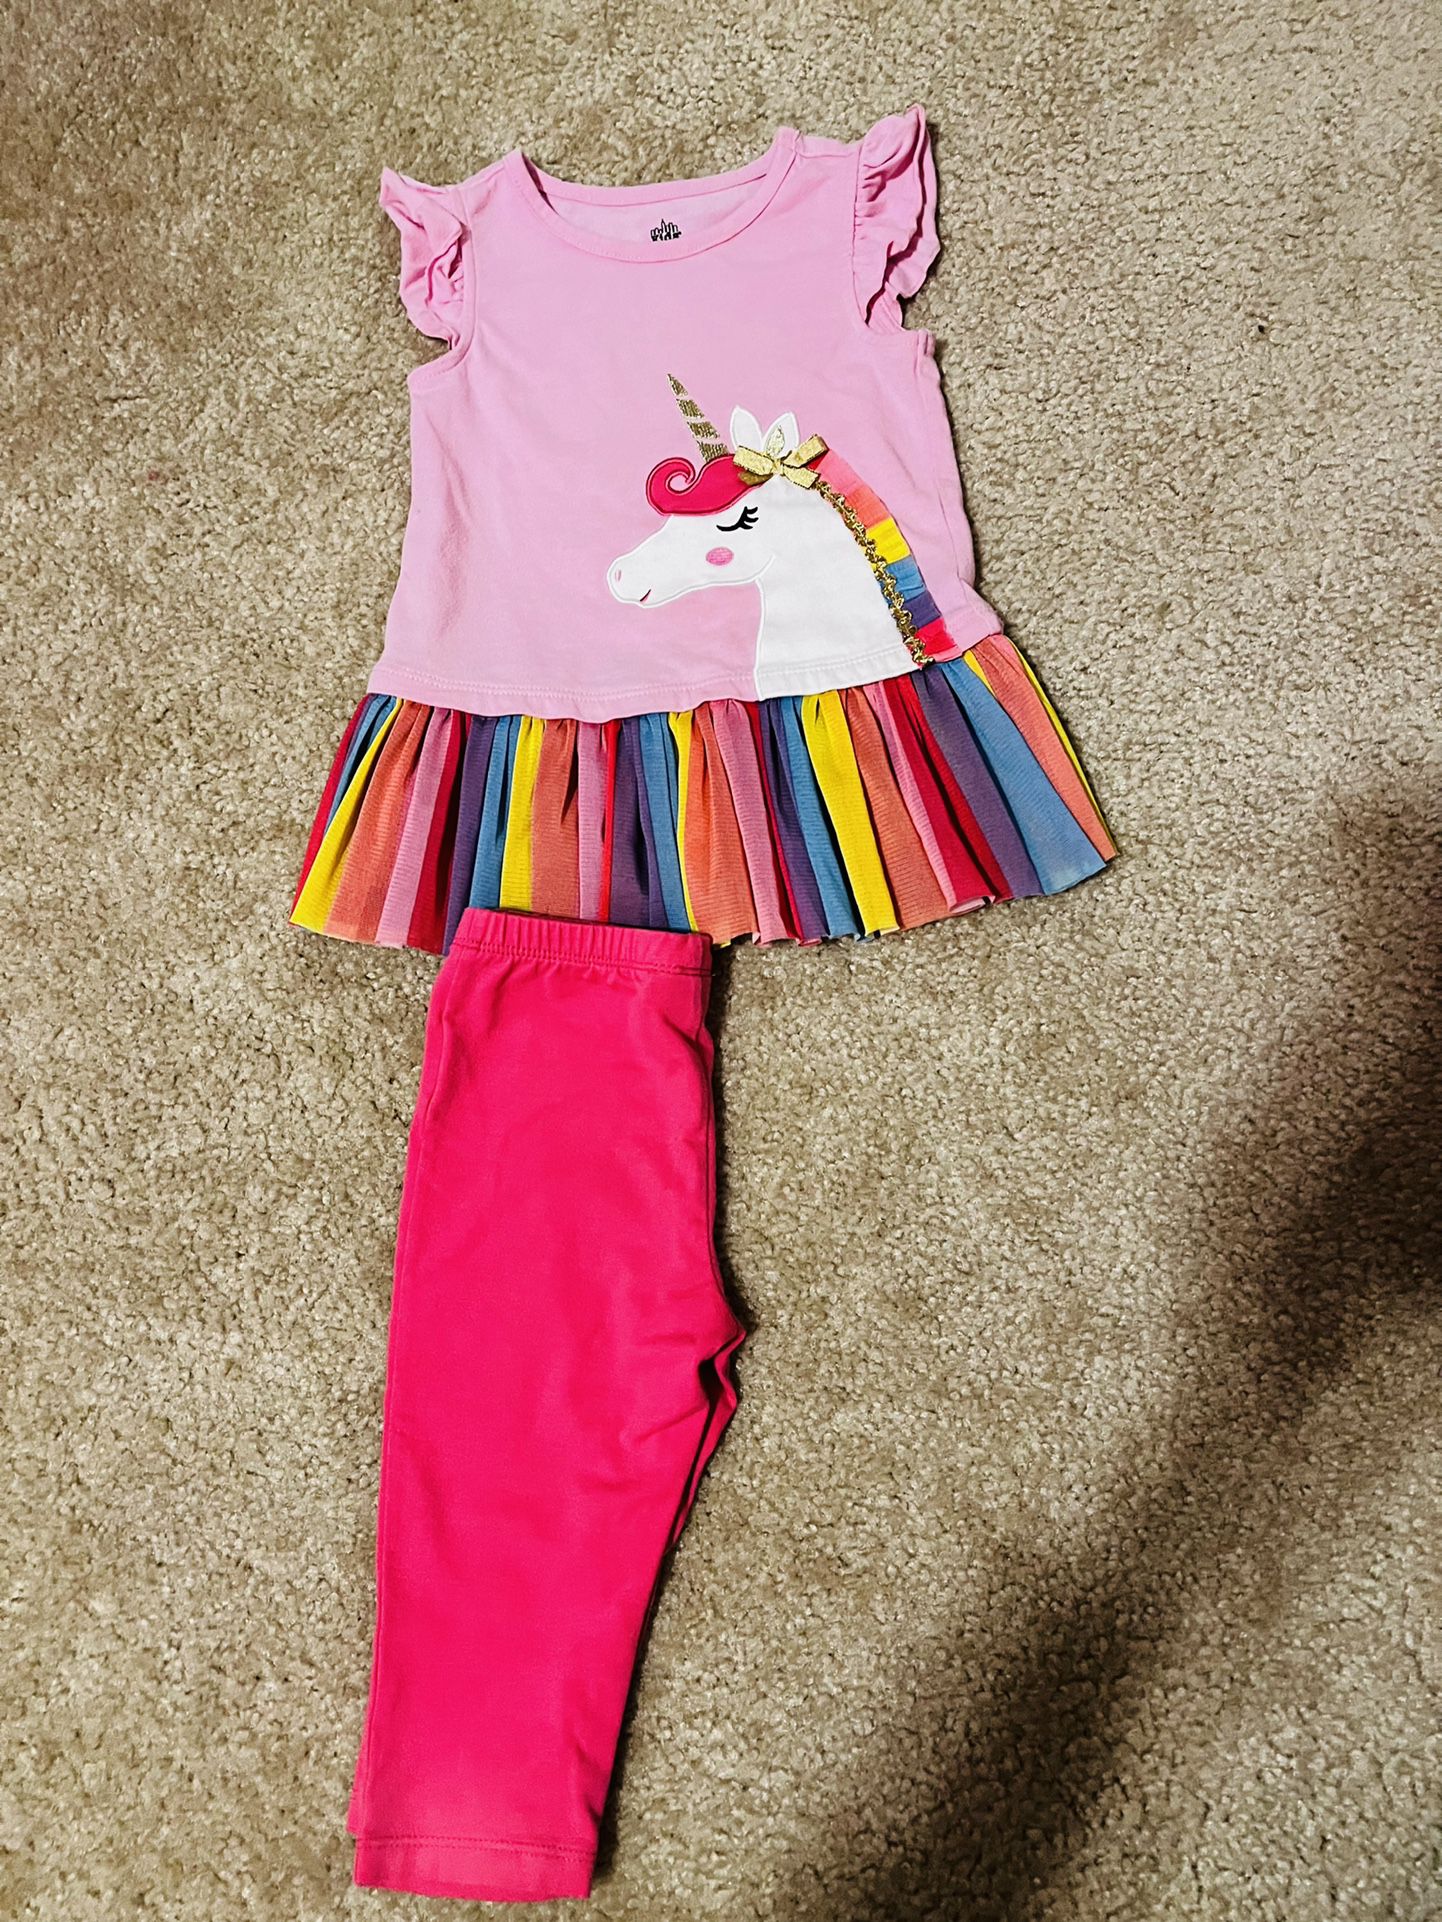 Toddler girl unicorn Outfits/ dress - 2 Year Old